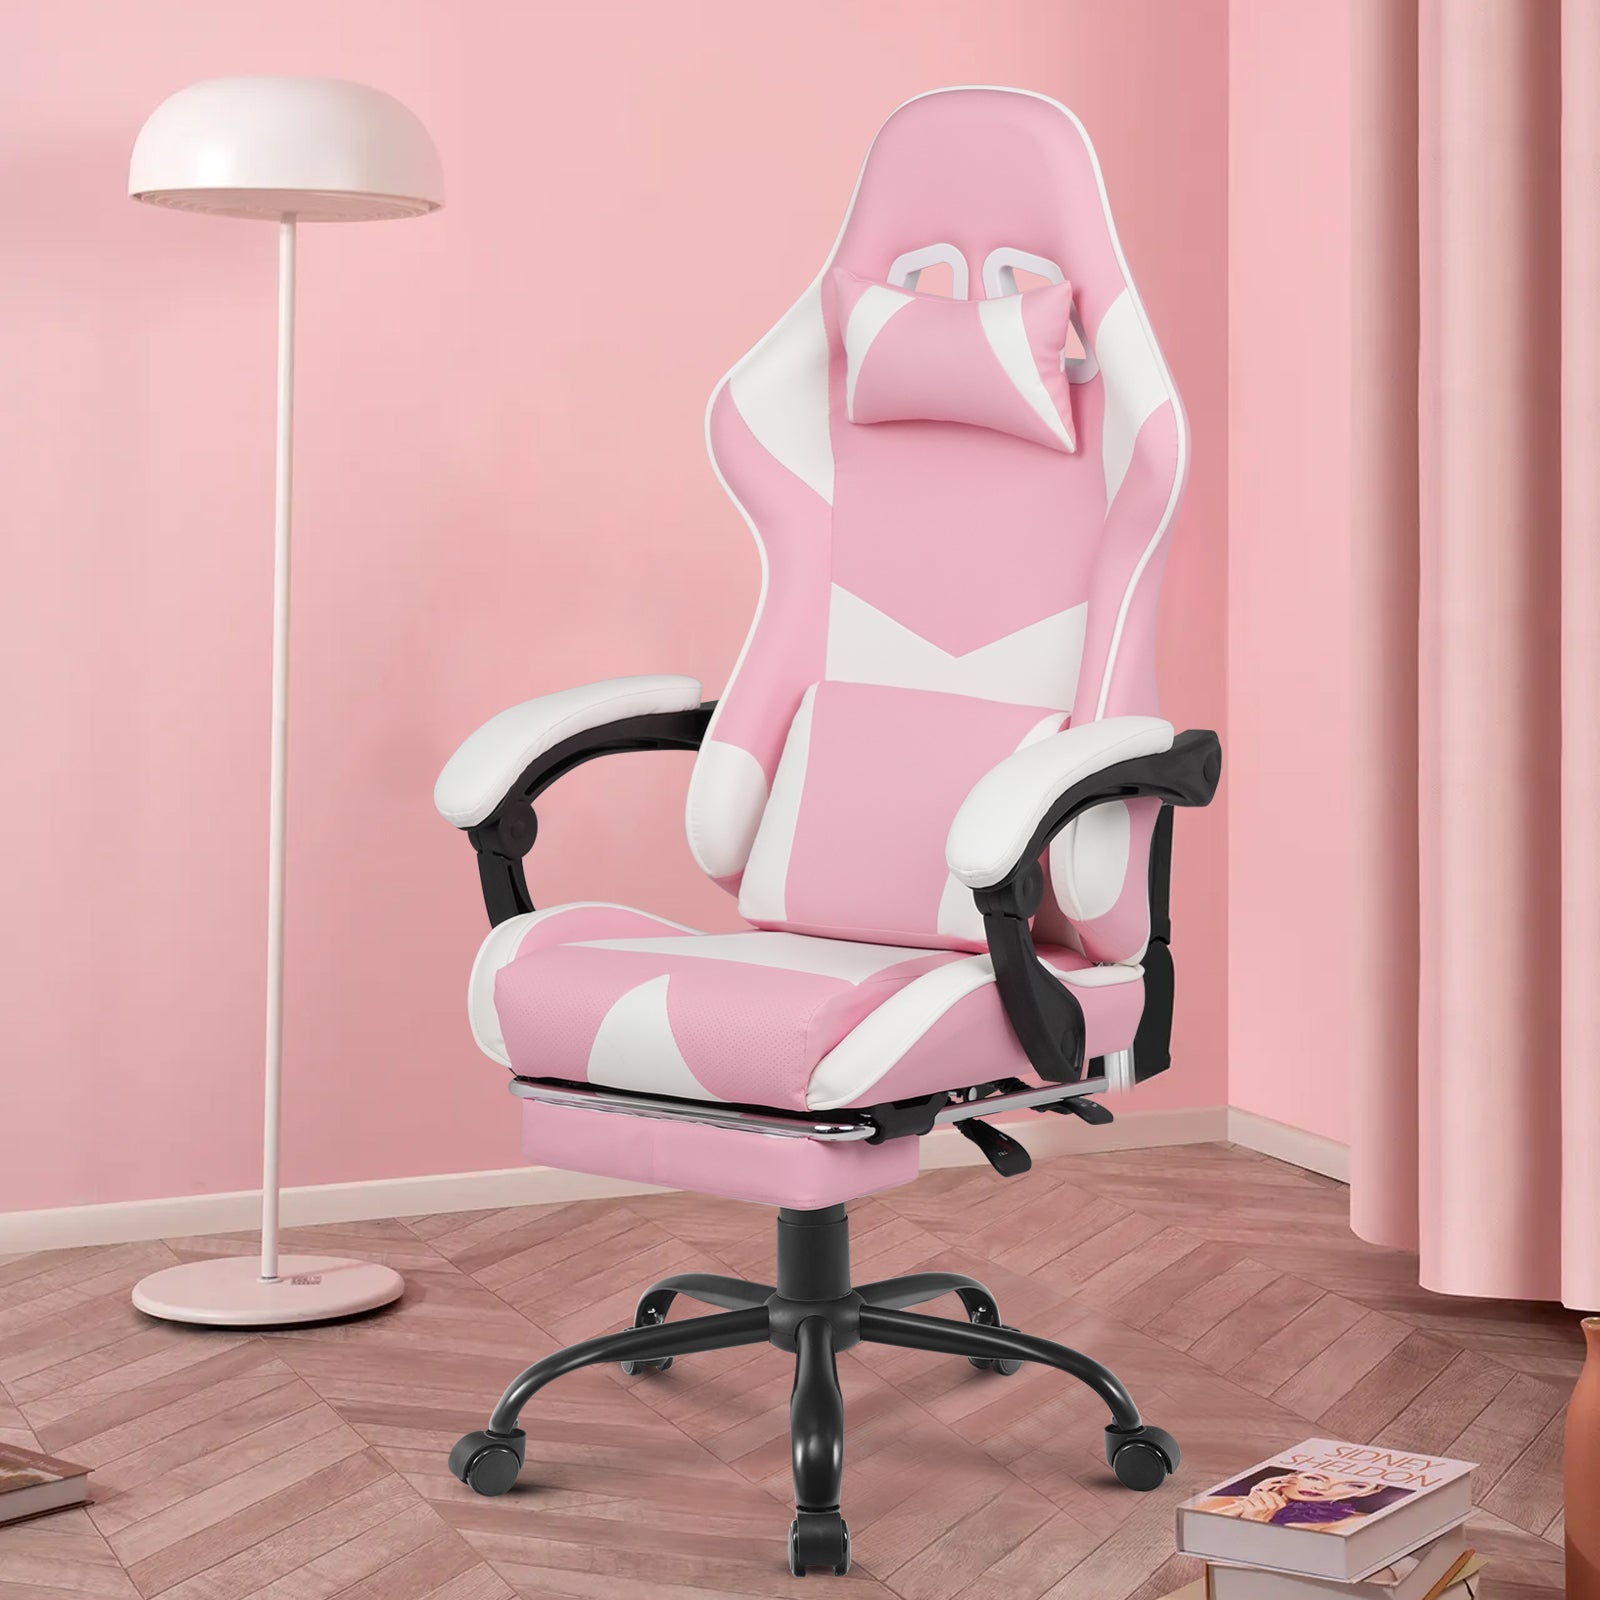 Advwin Gaming Office Chair Racing Recliner Ergonomic Executive Computer Seat with Footrest Pink